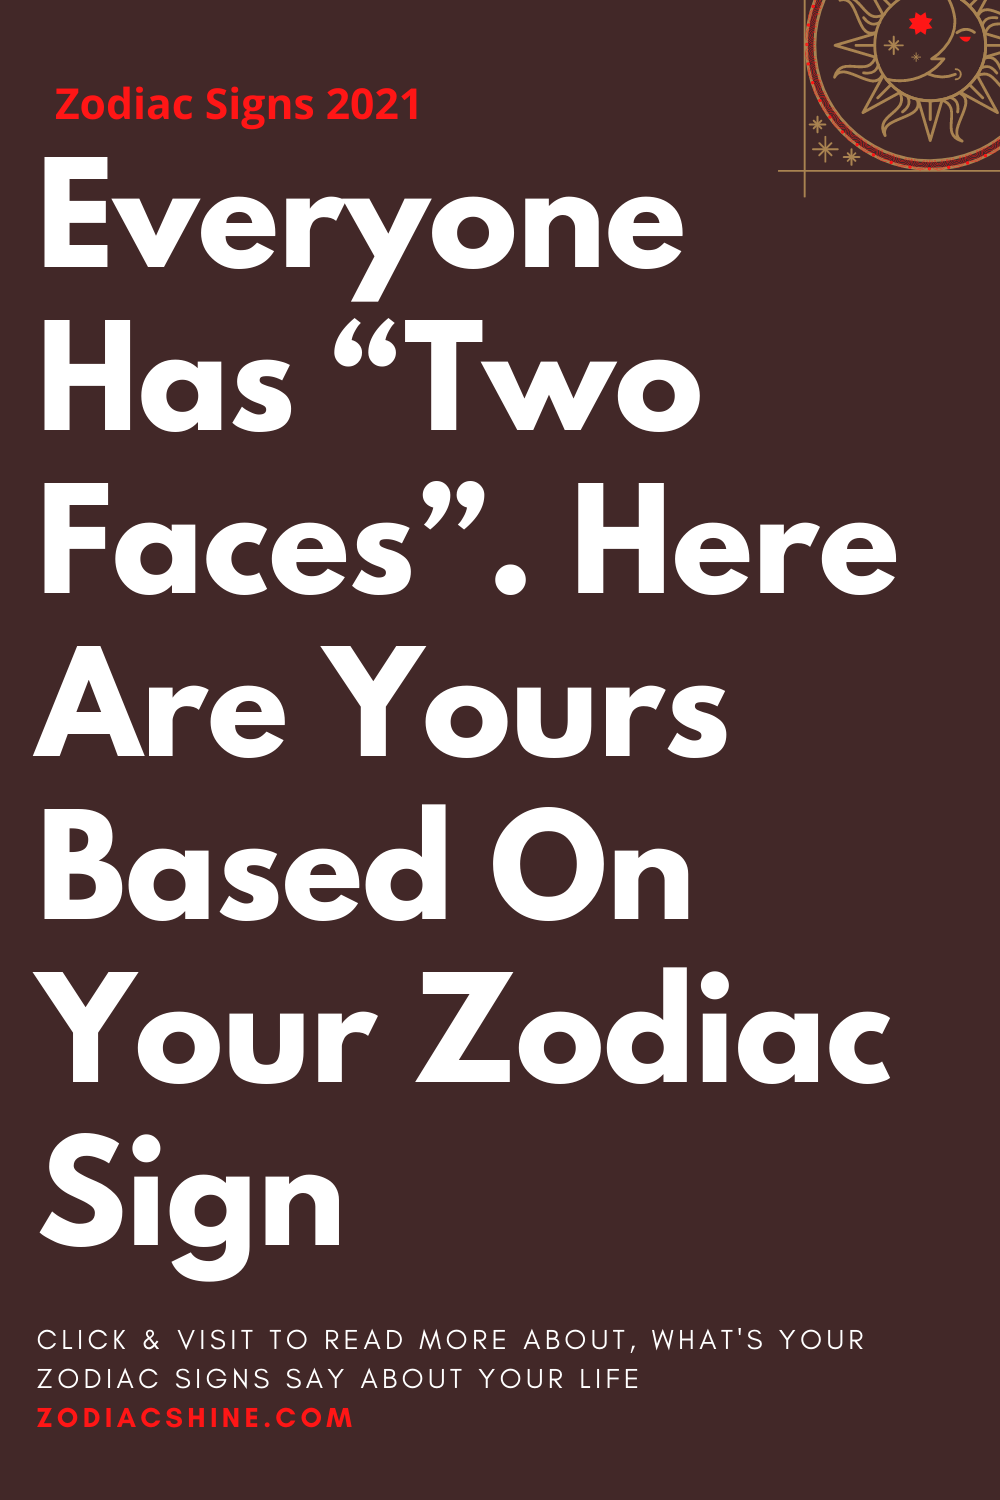 Everyone Has “Two Faces”. Here Are Yours Based On Your Zodiac Sign